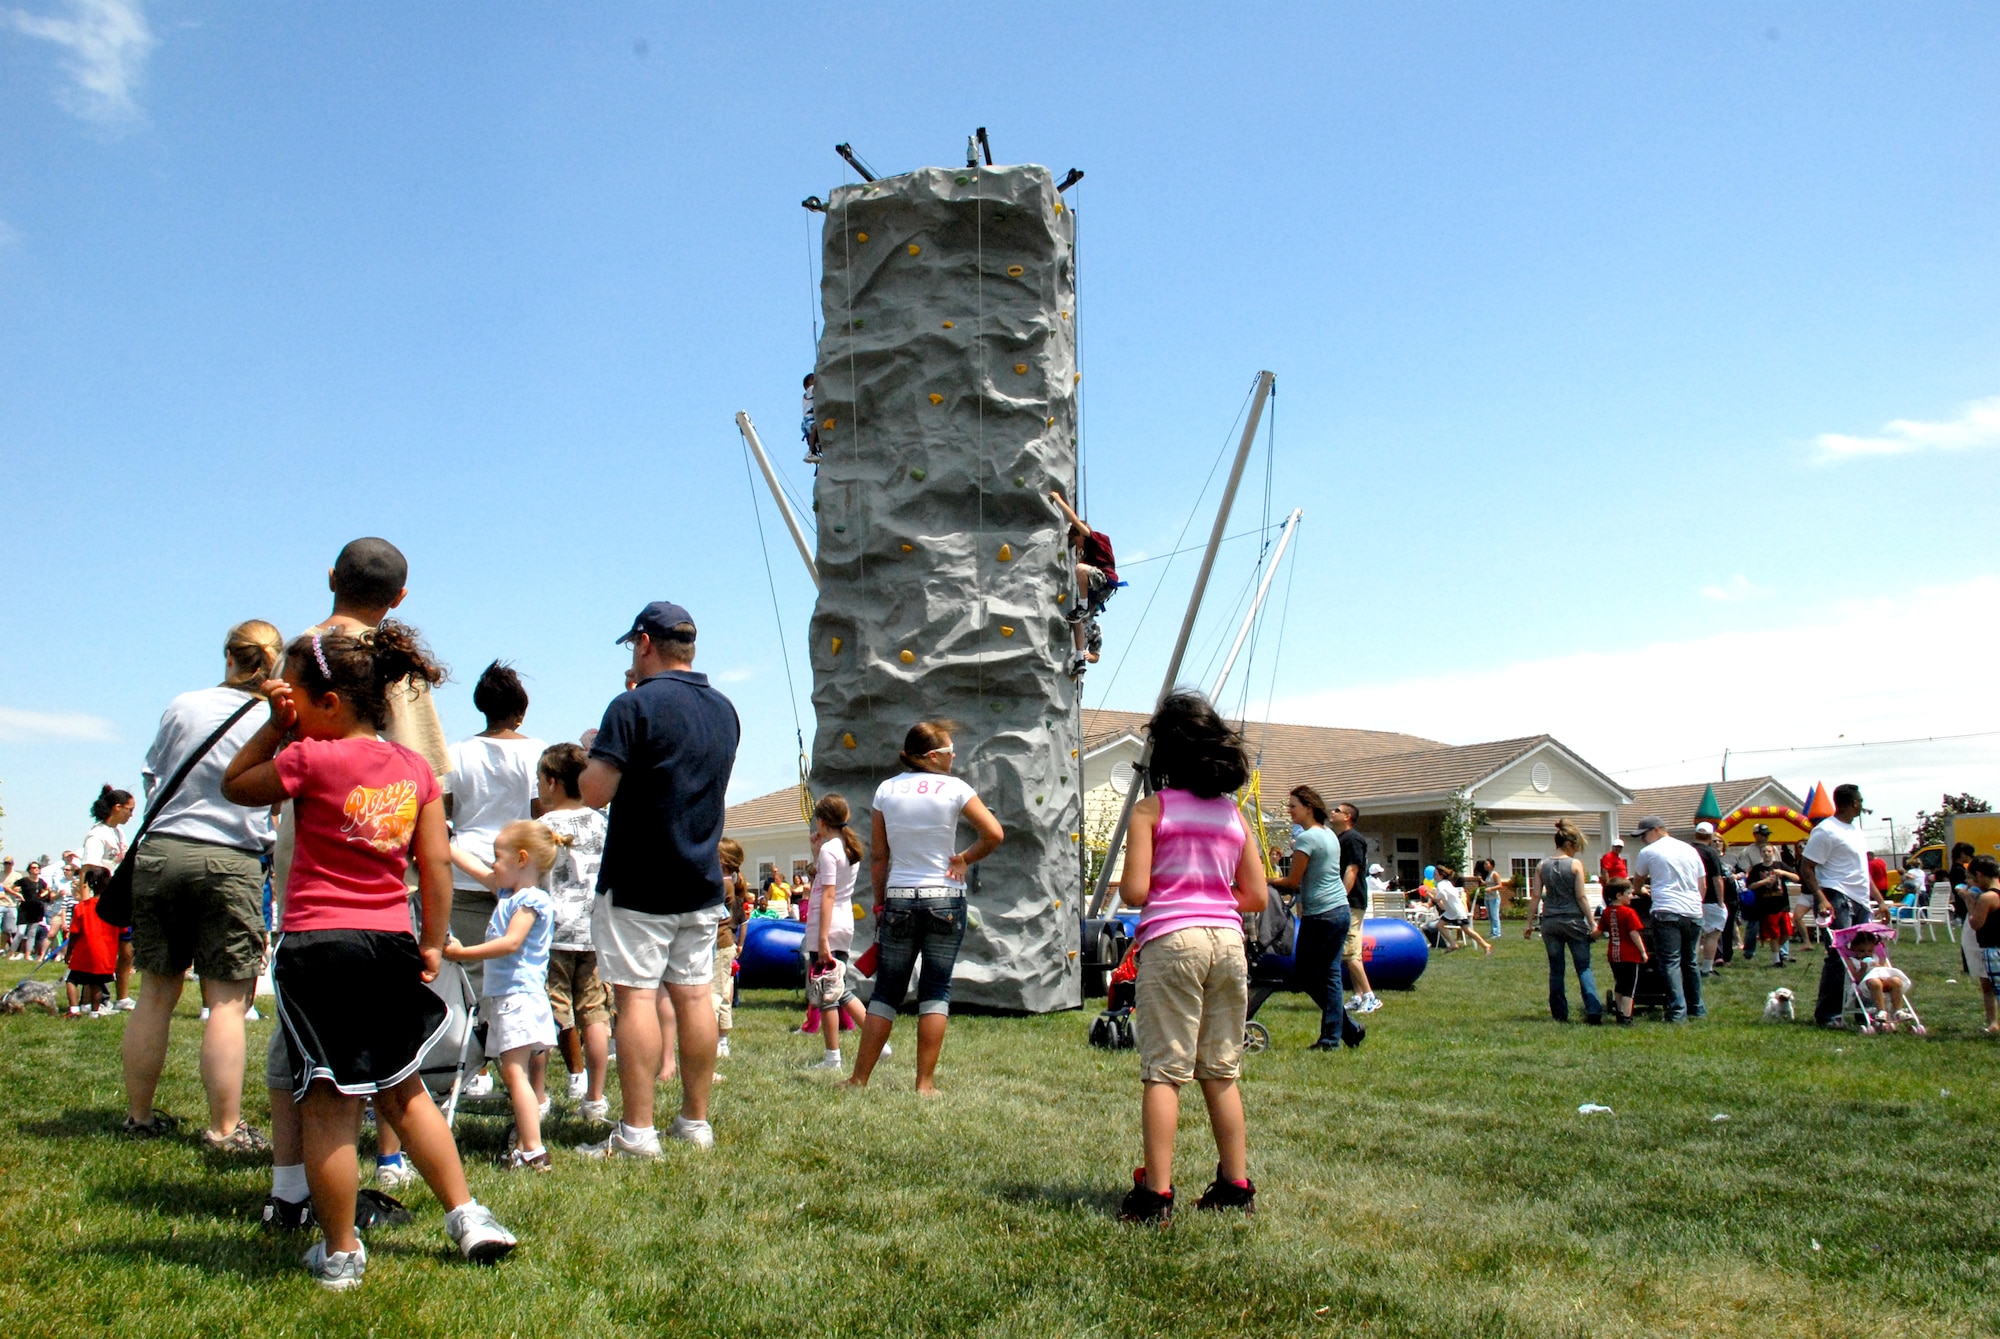 Team Dover gathers at the Eagle Heights Community Center for the Pet Extravaganza and Block Party May 8. There were many rides and attractions at the event, including a rock climbing wall, rubber band jump and moon bounce. (U.S. Air Force photo/Airman 1st Class Matthew Hubby)